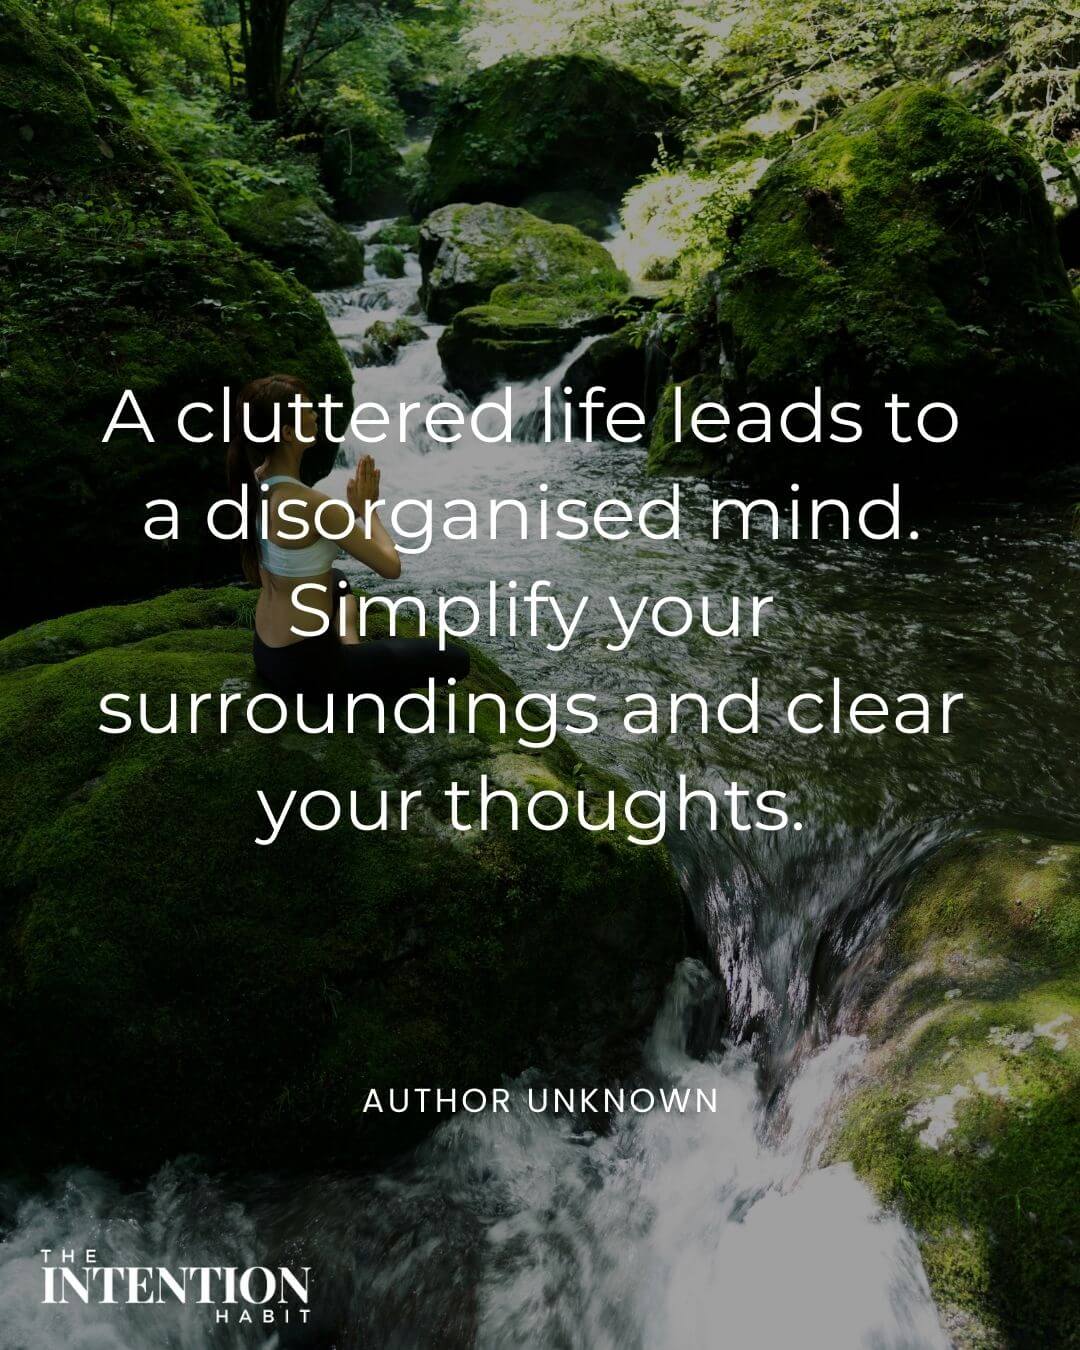 simple living quote - a cluttered life leads to a disorganised mind. Simplify your surroundings and clear your thoughts